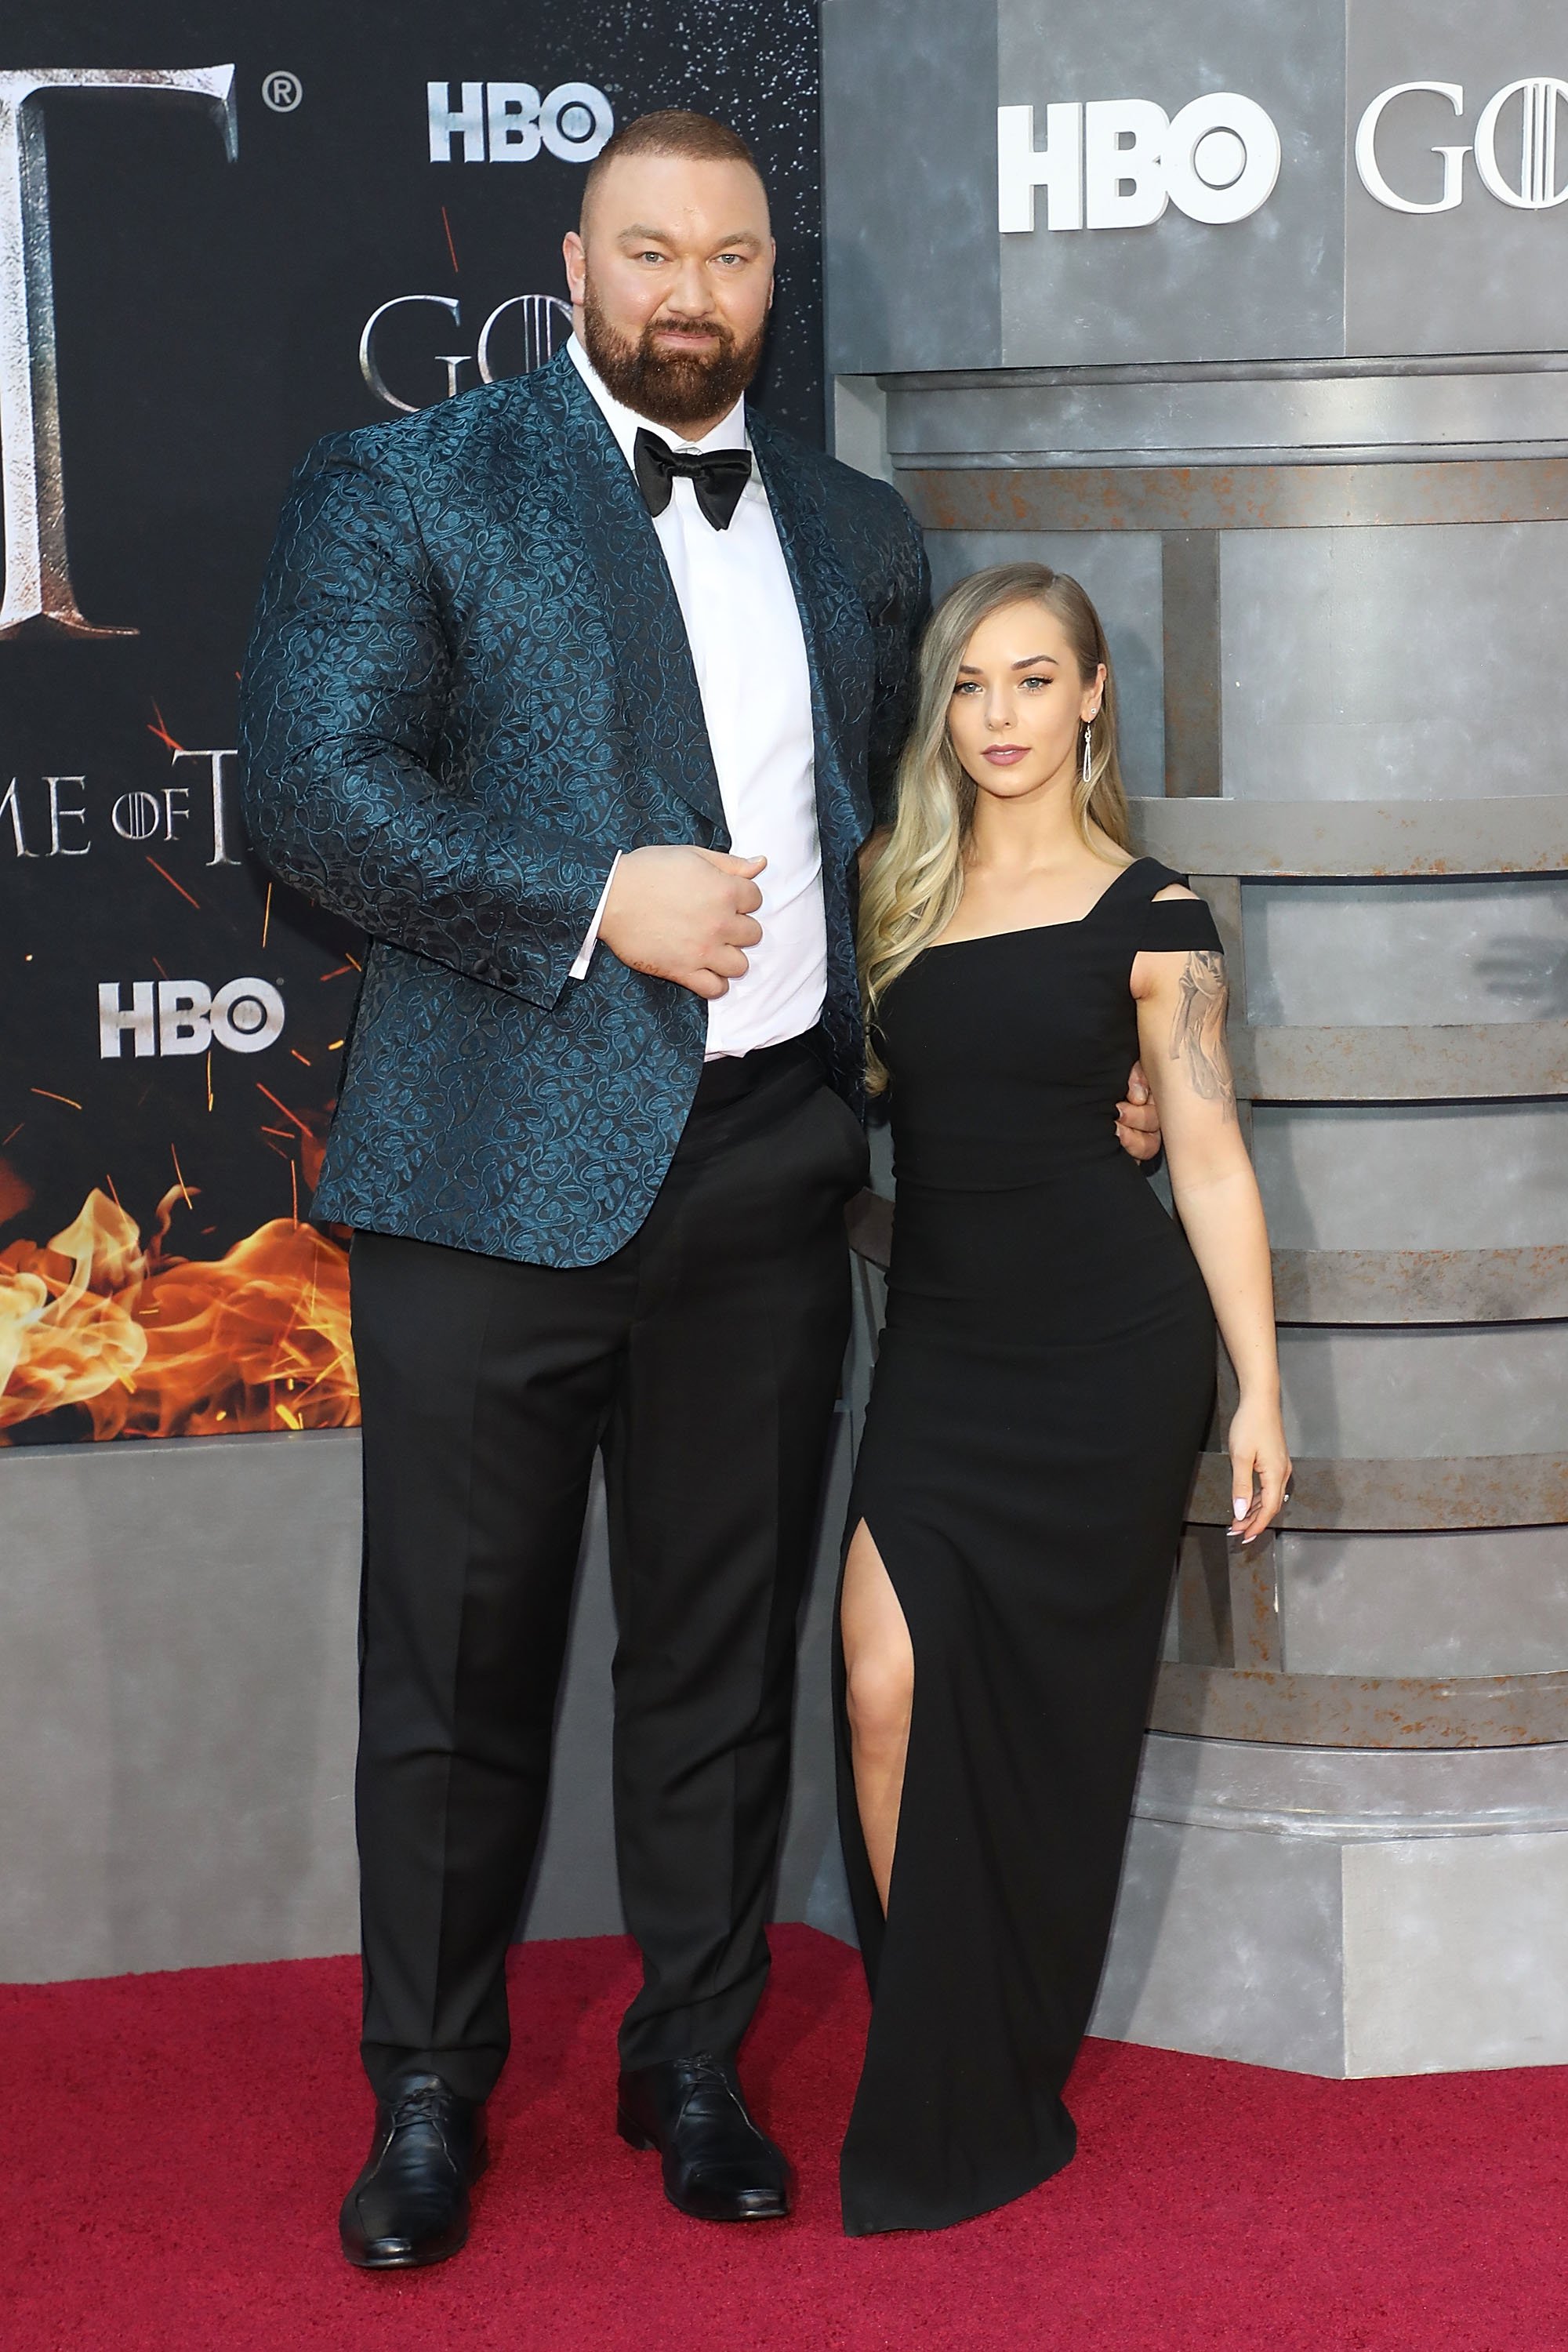 Hafthor Julius Bjornsson and Kelsey Henson attend the premiere of "Game of Thrones" at Radio City Music Hall on April 3, 2019, in New York City. | Source: Getty Images.